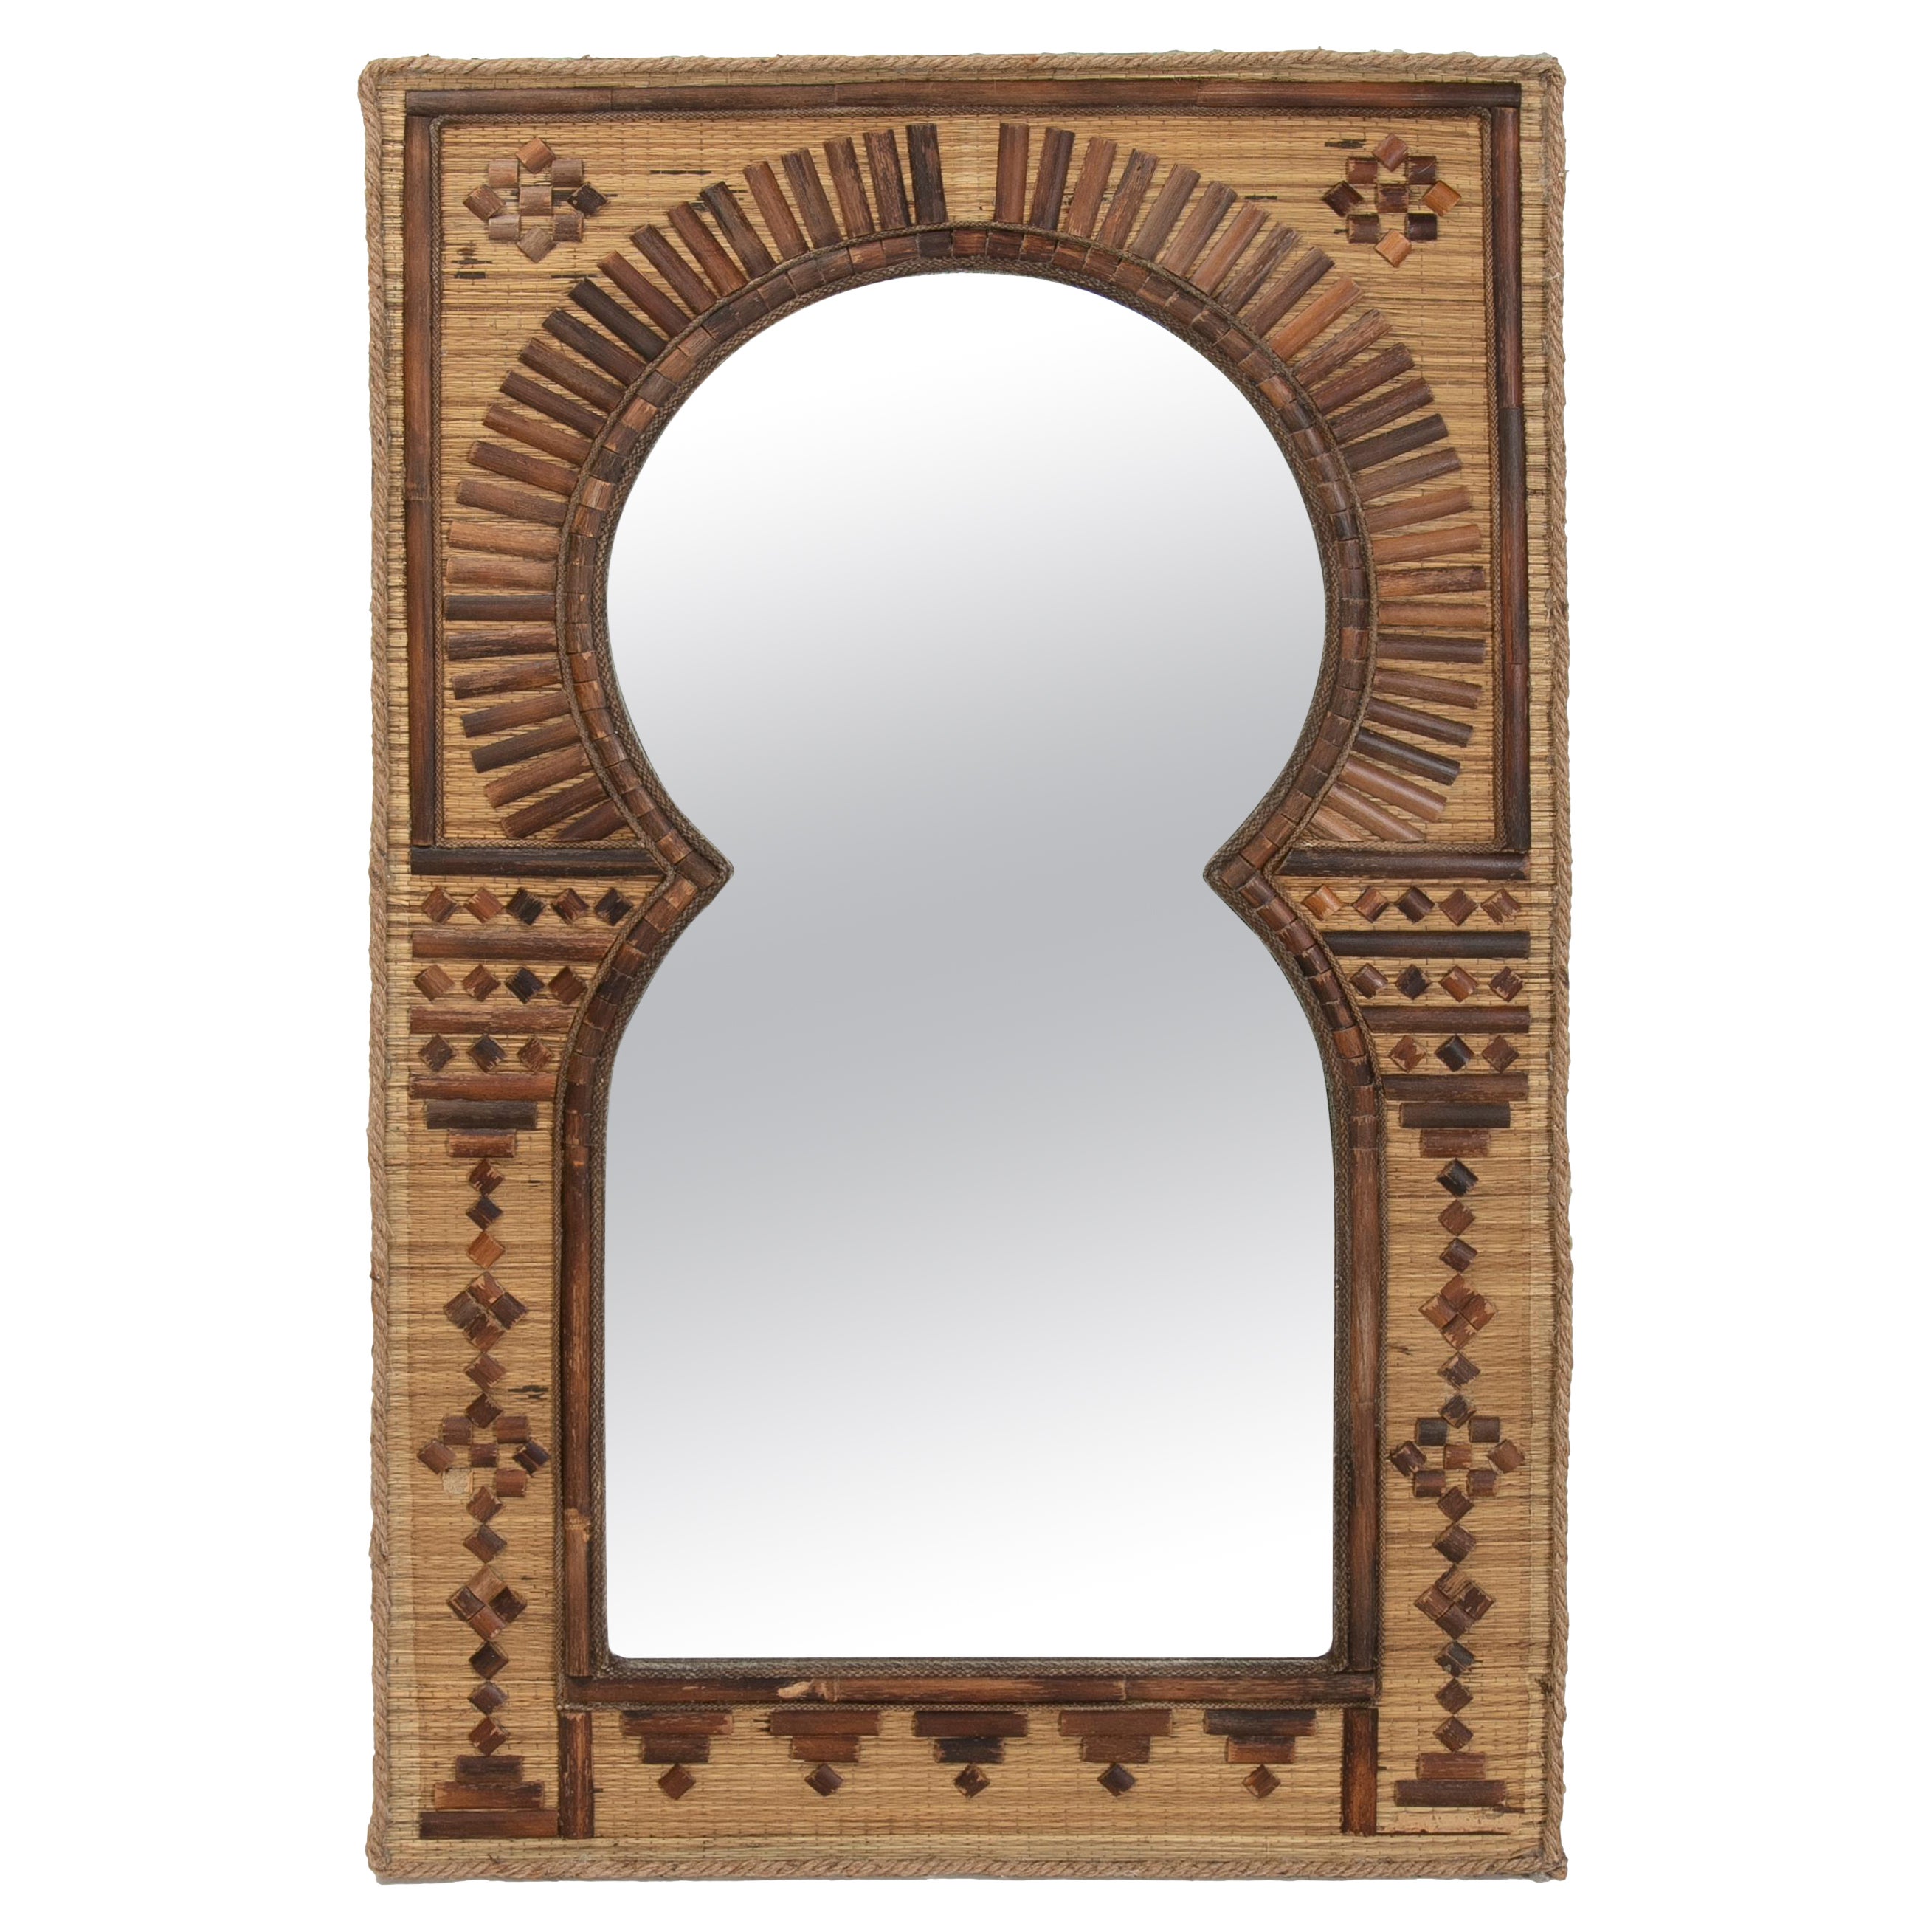 1980s Bamboo, Straw and Rope Mirror in the Shape of a Typical Muslim Arch